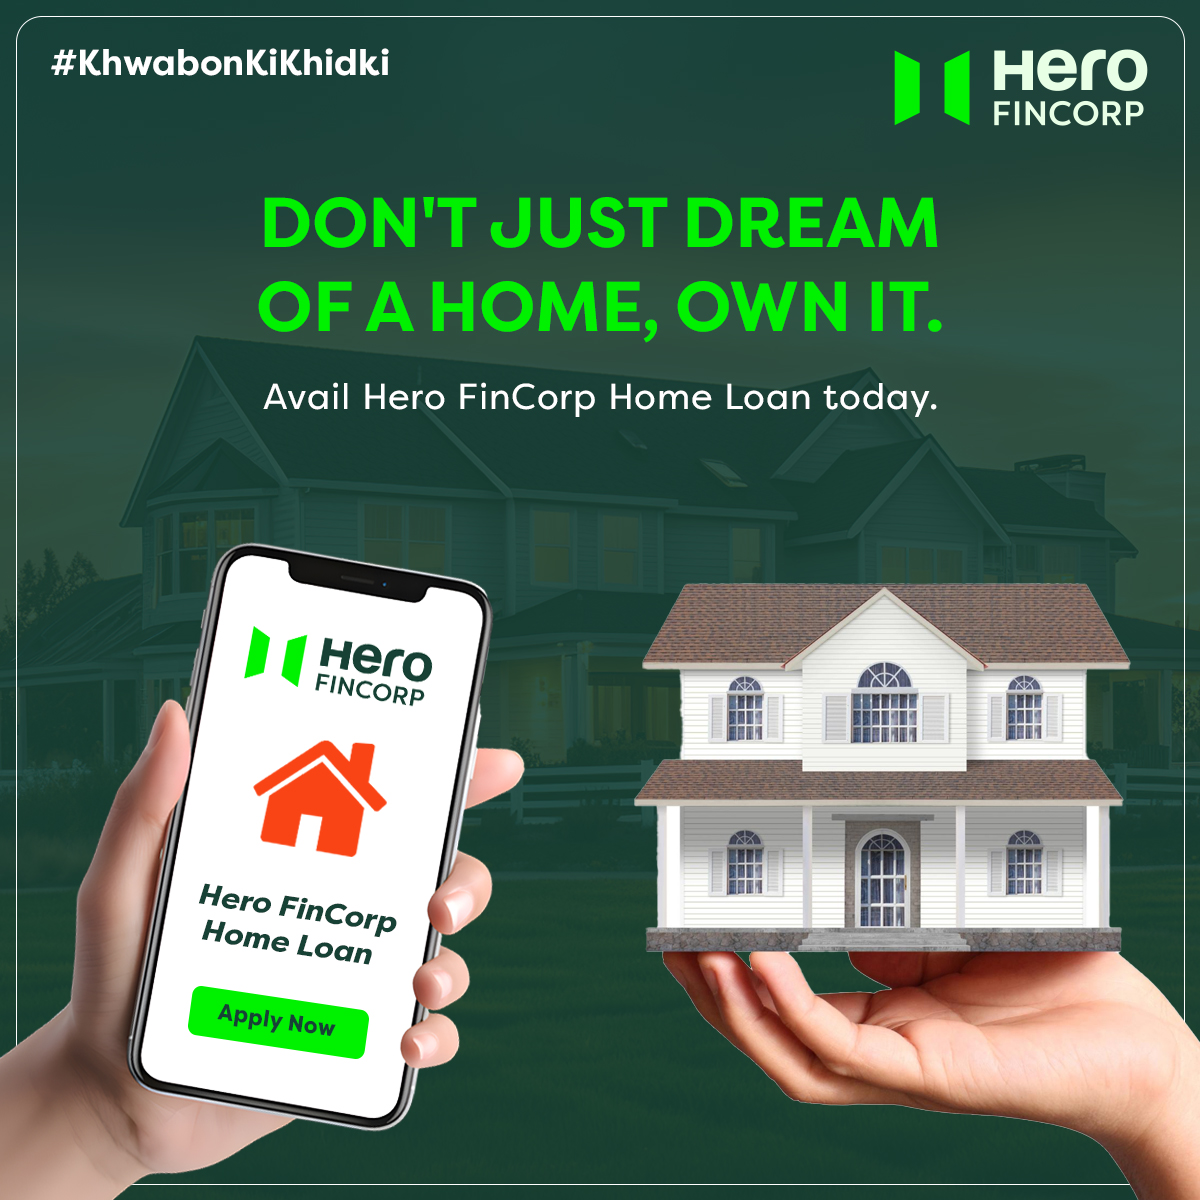 Time is money, and we don't waste either! Hero FinCorp's quick approvals keep you ahead of the game. #SabseQuick

#HeroFinCorp #KhwabonKiKhidki #HomeLoan #NewProperty #DreamHome